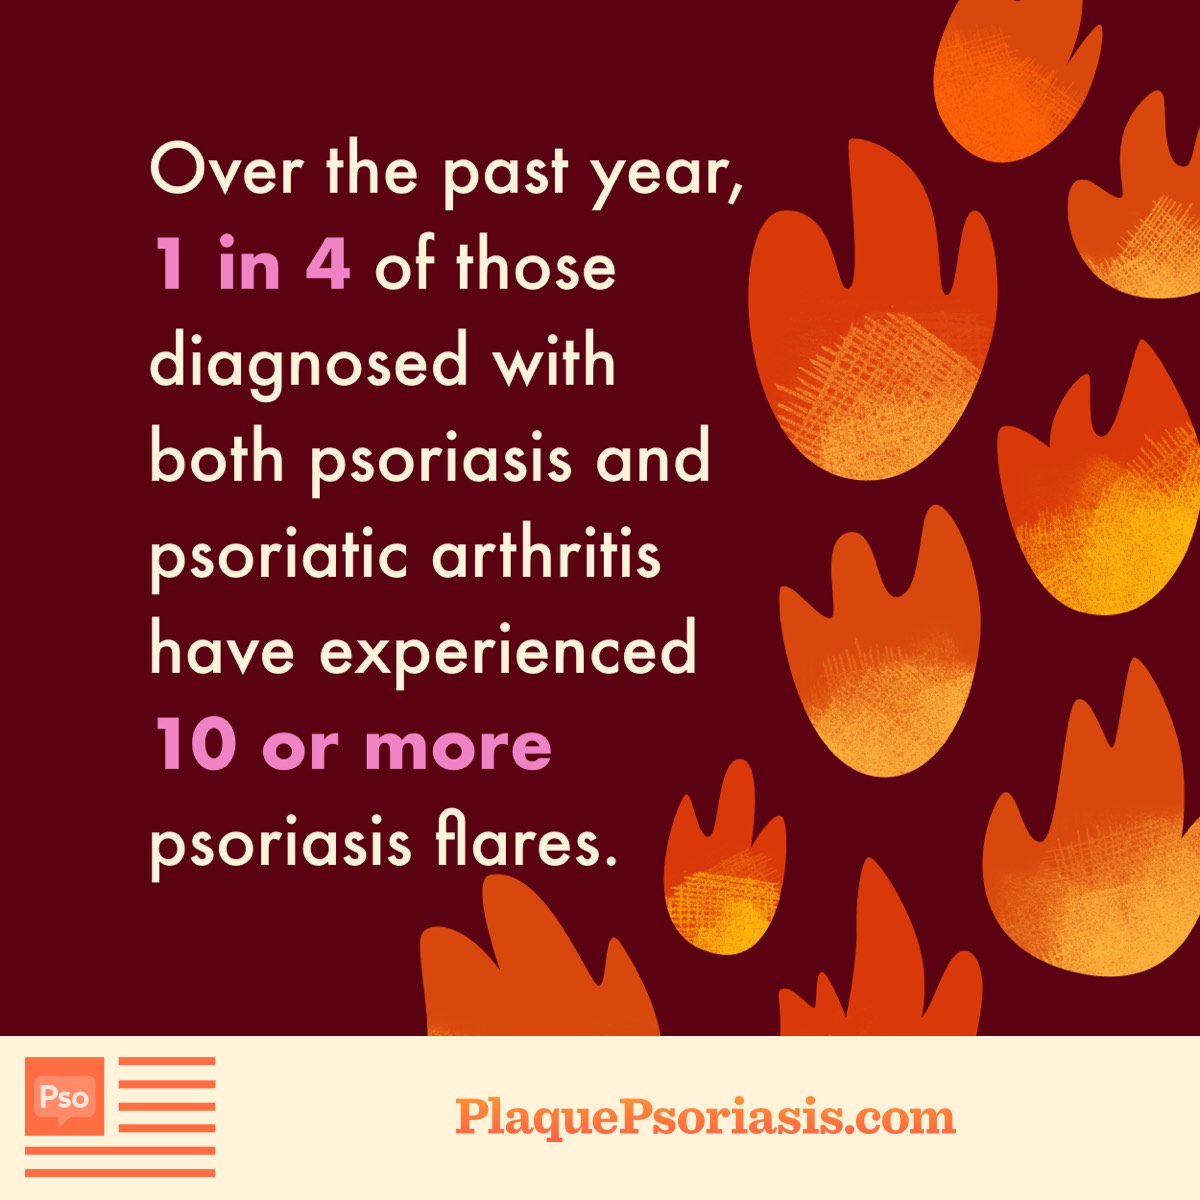 Infographic reading, Over the past year, 1 in 4 of those diagnosed with both psoriasis and psoriatic arthritis have experienced 10 or more psoriasis flares.